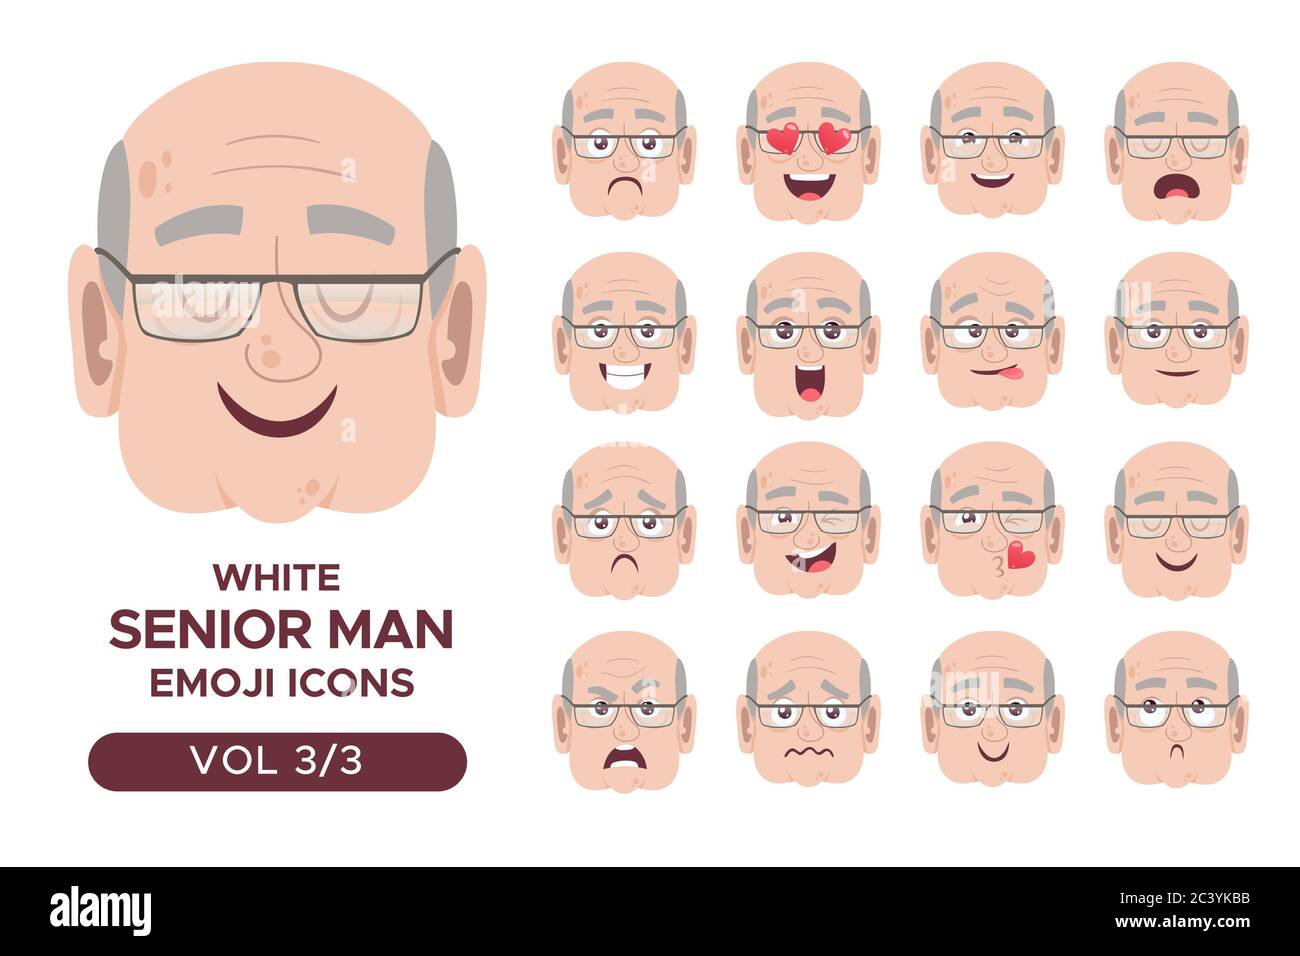 Male facial emotion avatar set. White senior man emoji character with different expressions. Vector illustration in cartoon style. Set 3 of 3. Stock Vector